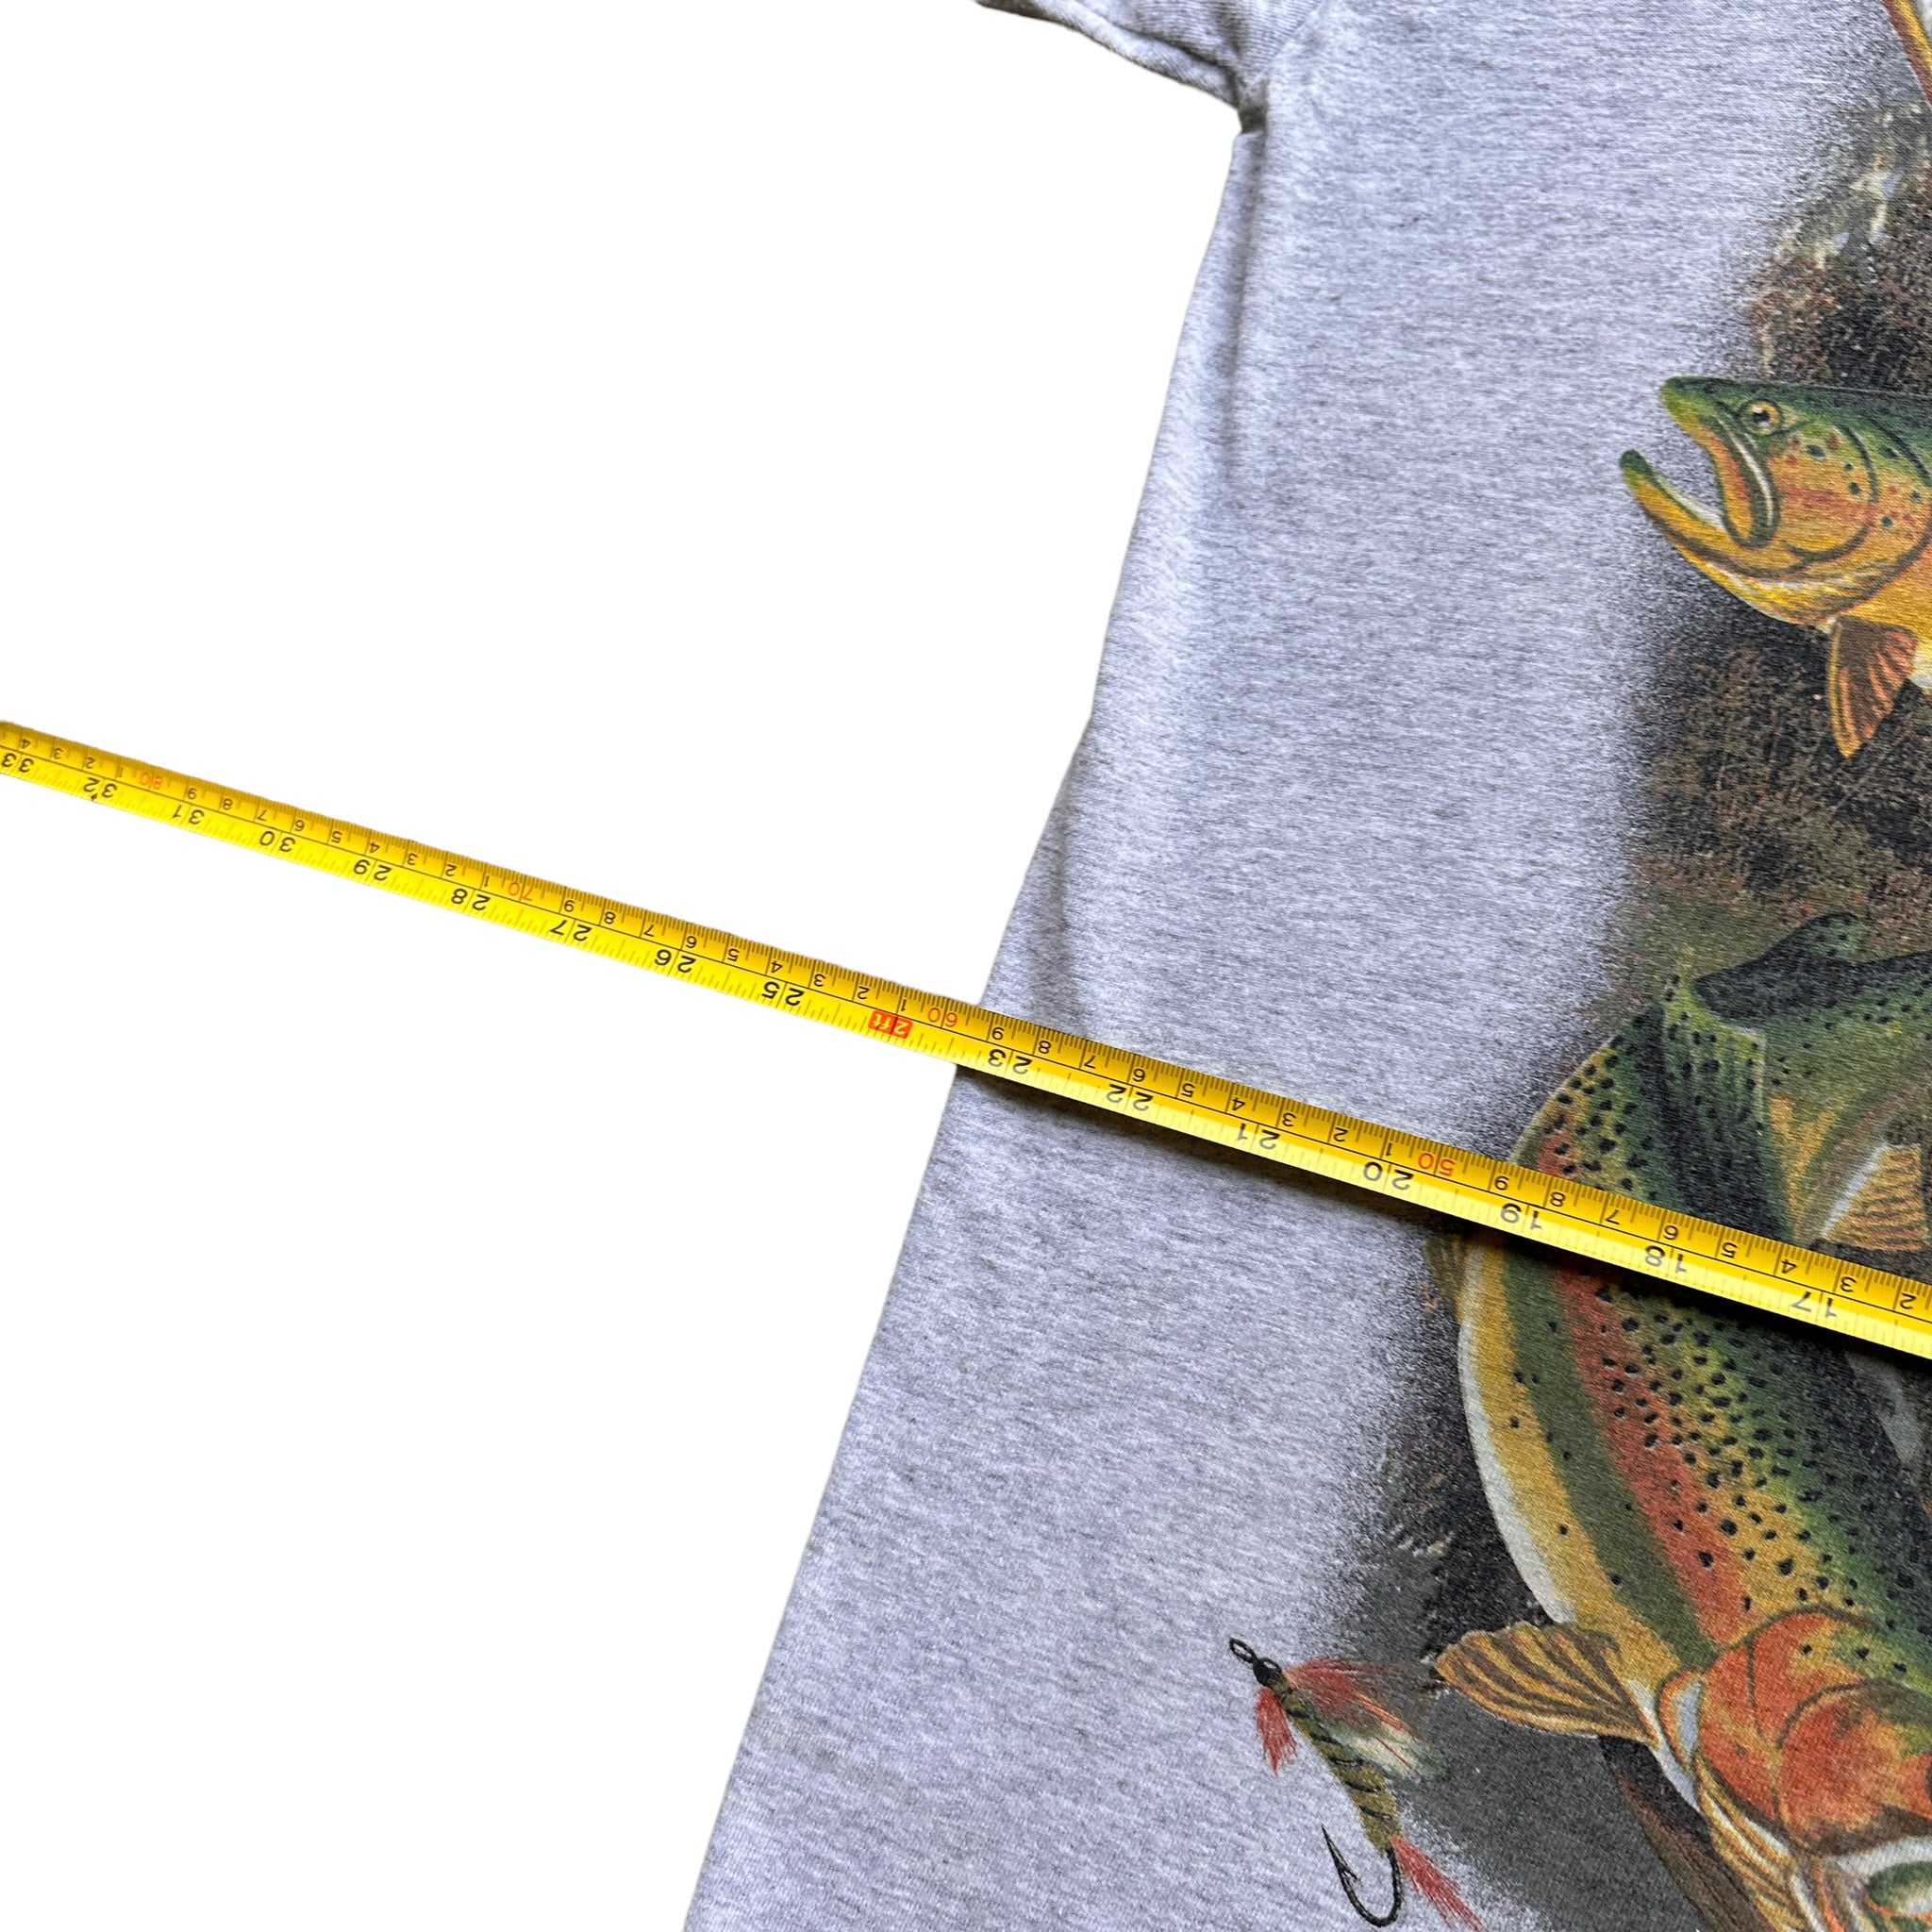 Vintage Fishing Parody Tee size XL for $30 available now